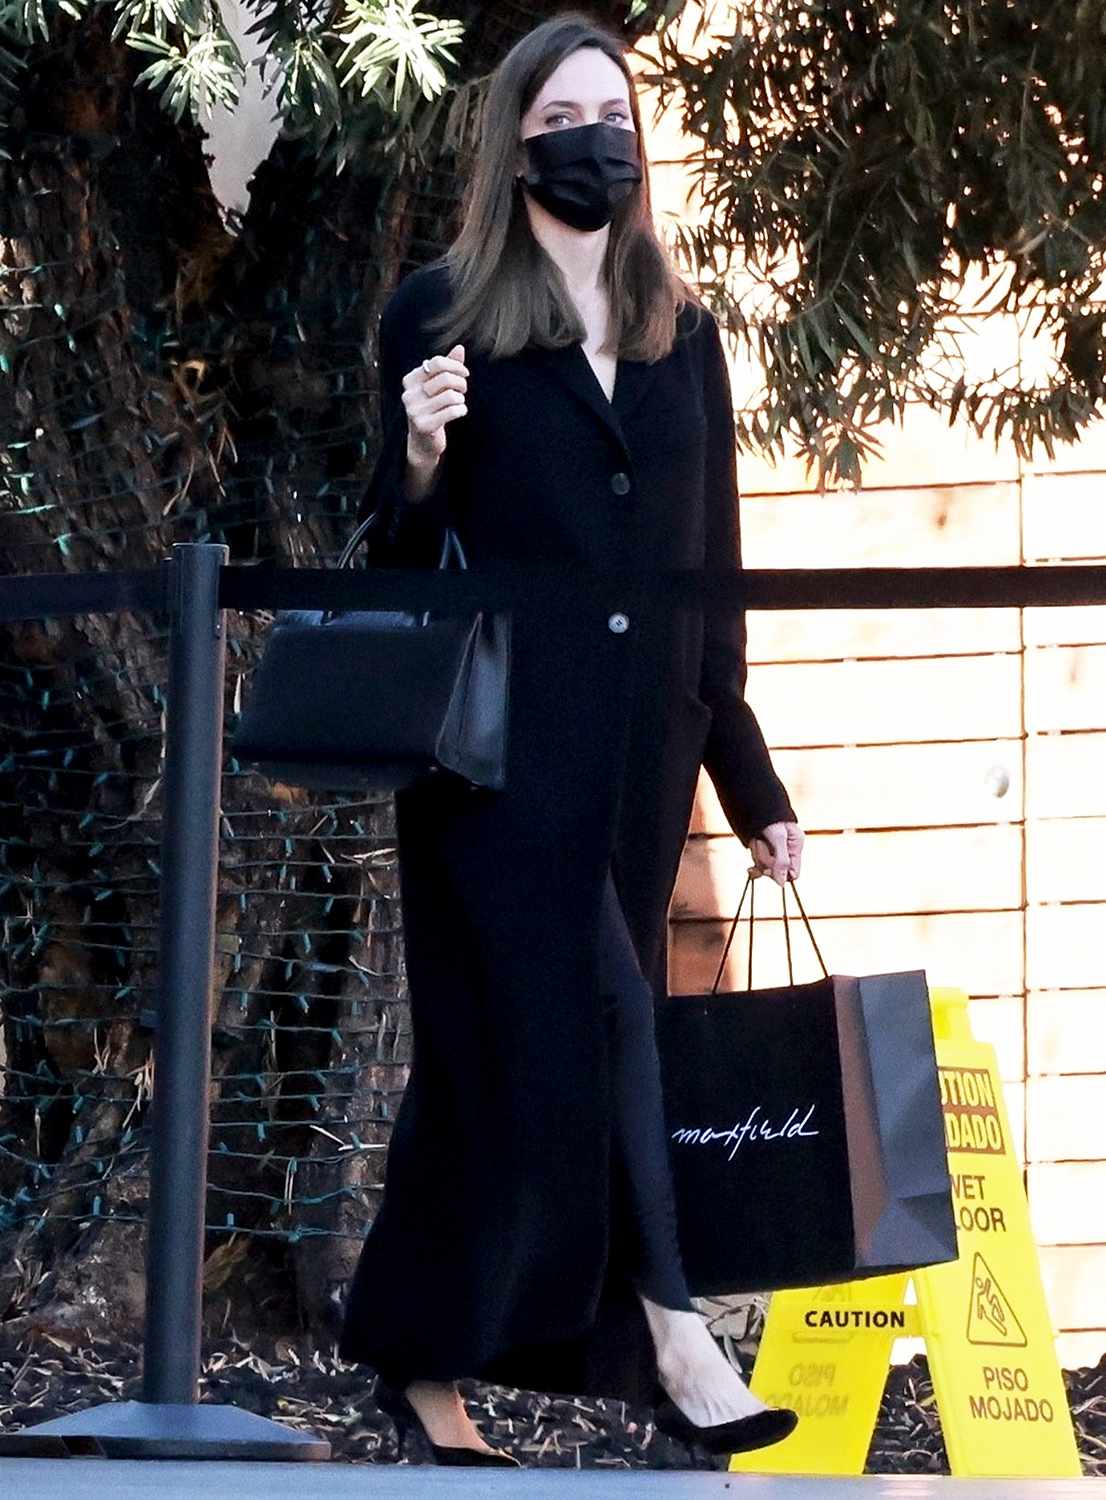 Actress Angelina Jolie joins the crowds of last-minute shoppers in West Hollywood as she purchases gifts on Christmas Eve. Pictured: Angelina Jolie BACKGRID USA 24 DECEMBER 2021